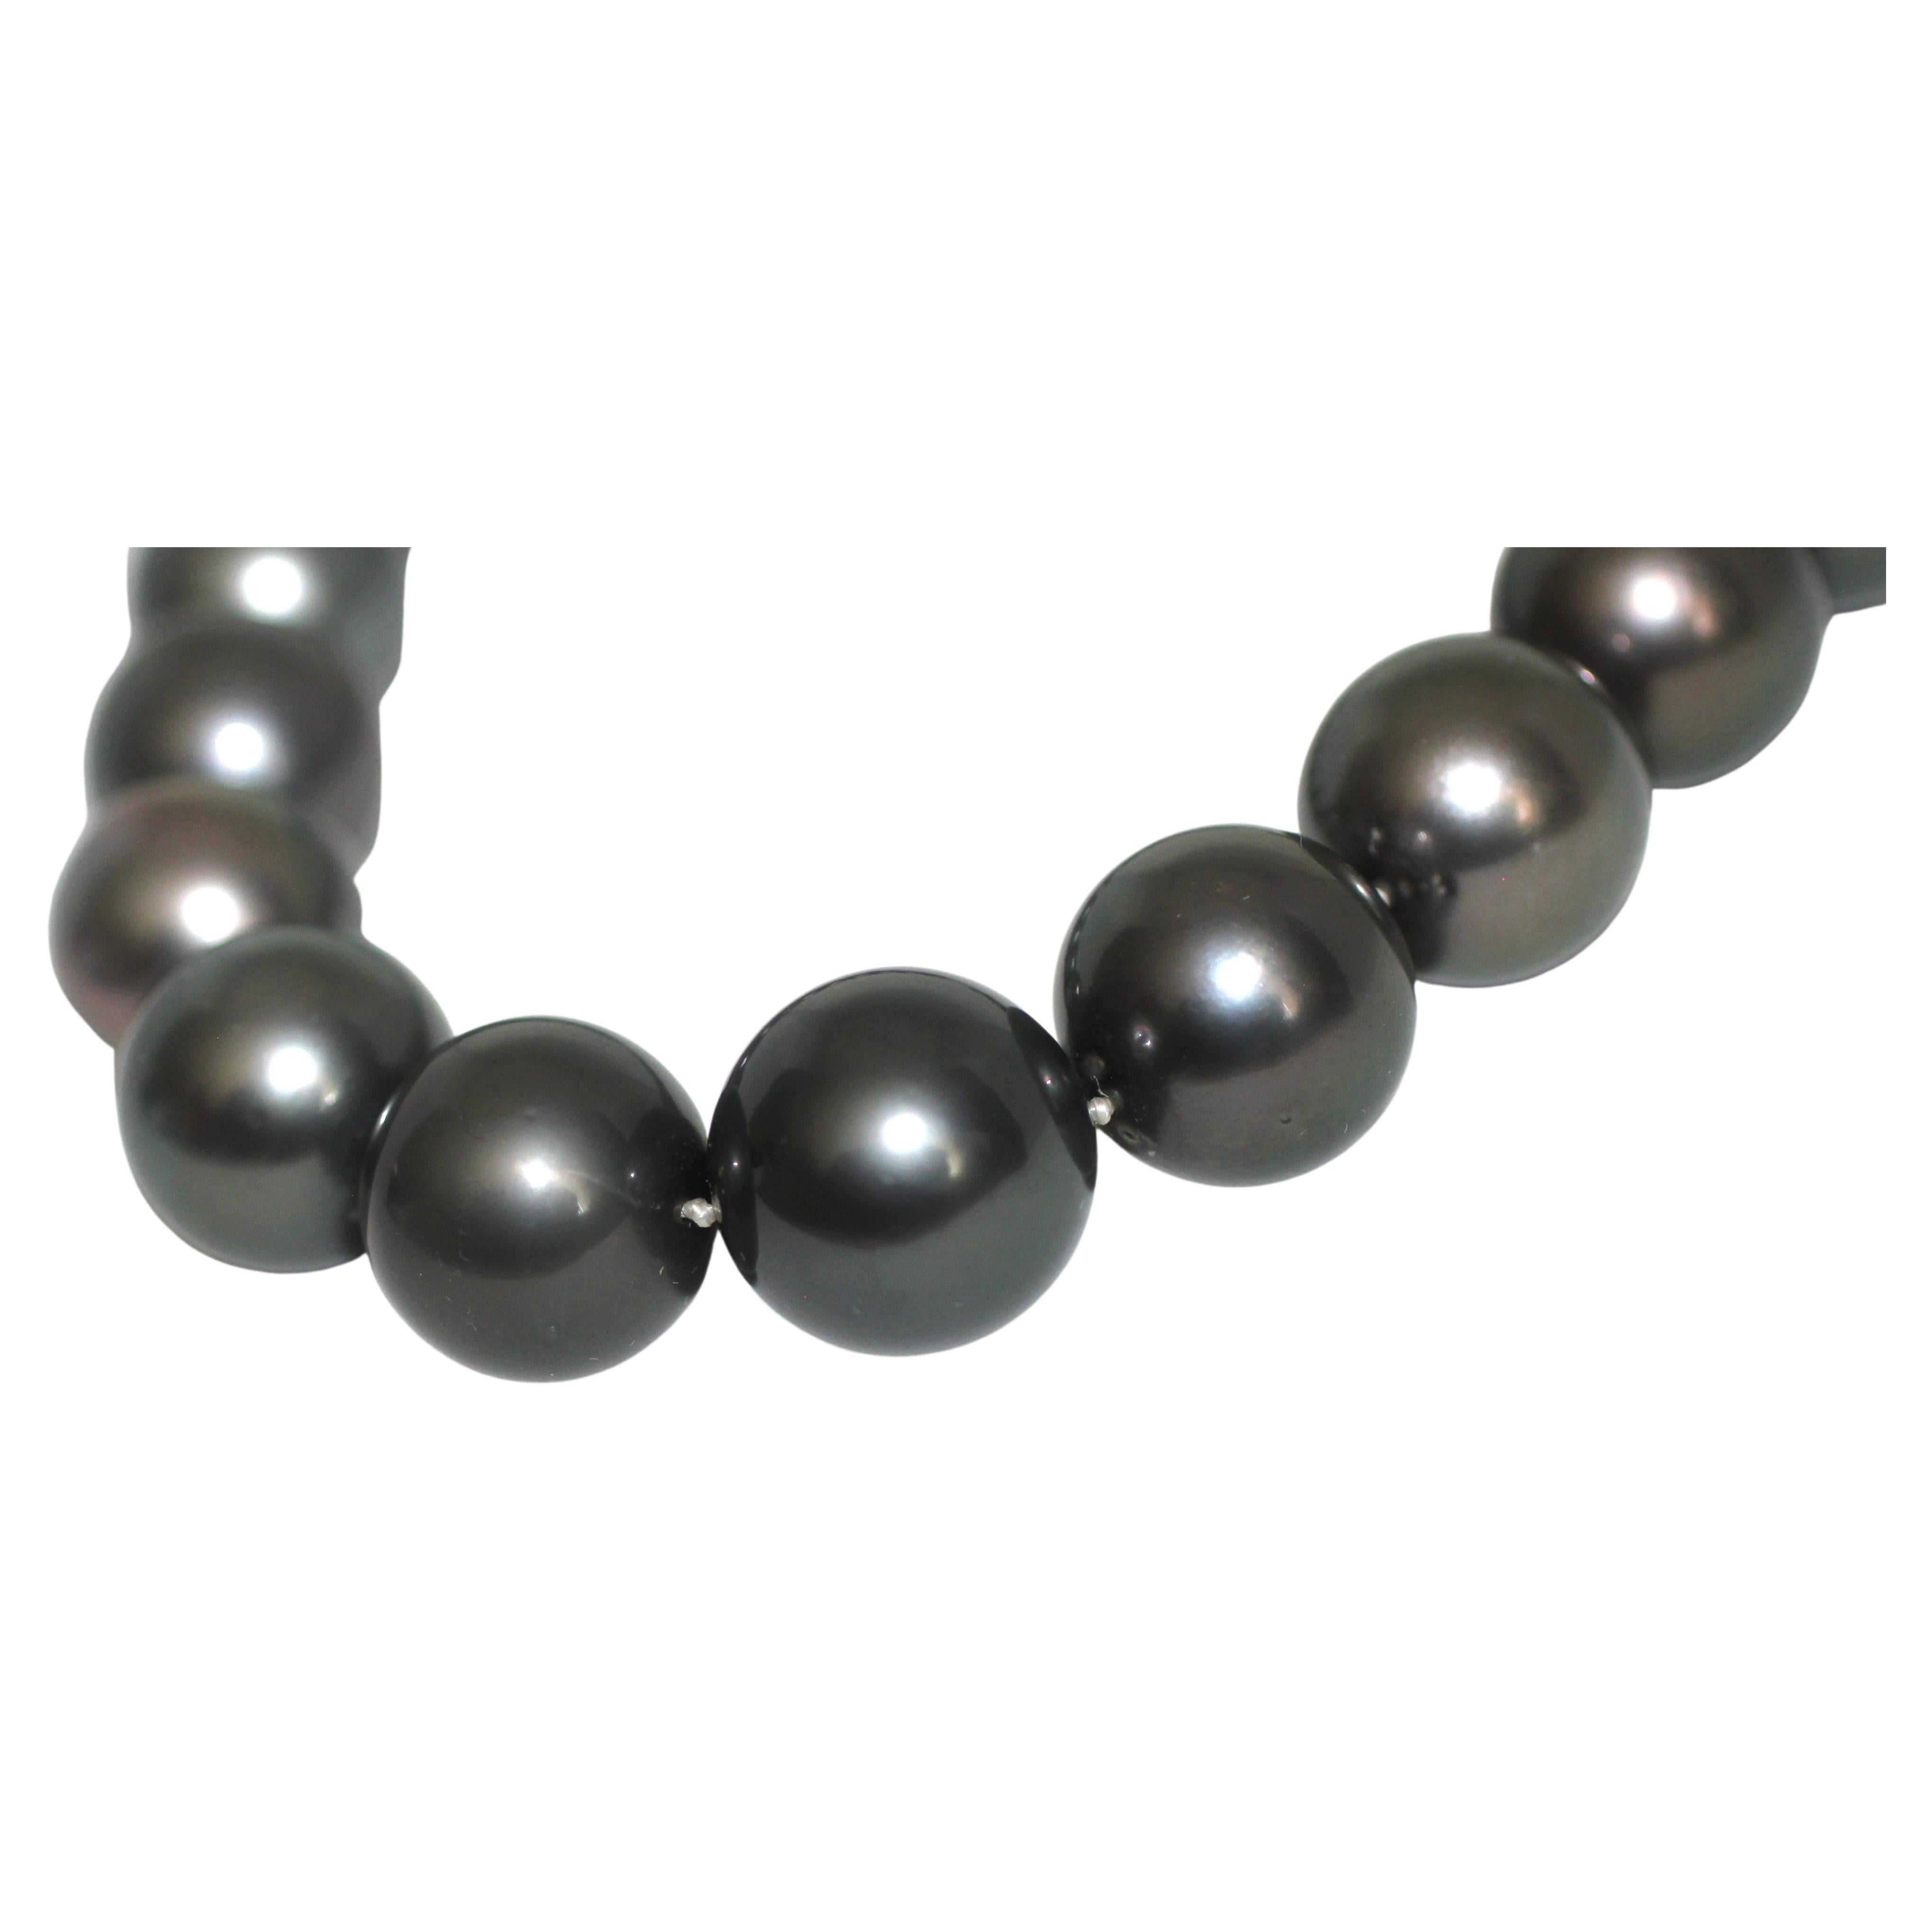 Hakimoto By Jewel Of Ocean 15-16.7mm Black Round Tahitian Cultured Pearls
18K High Polish White Gold Featuring 12 mm full ball Round Near Colorless Brilliant Diamonds clasp
Total Weight (g): 142.4
Orient: Present
Luster: Very Good
Surface: Lightly